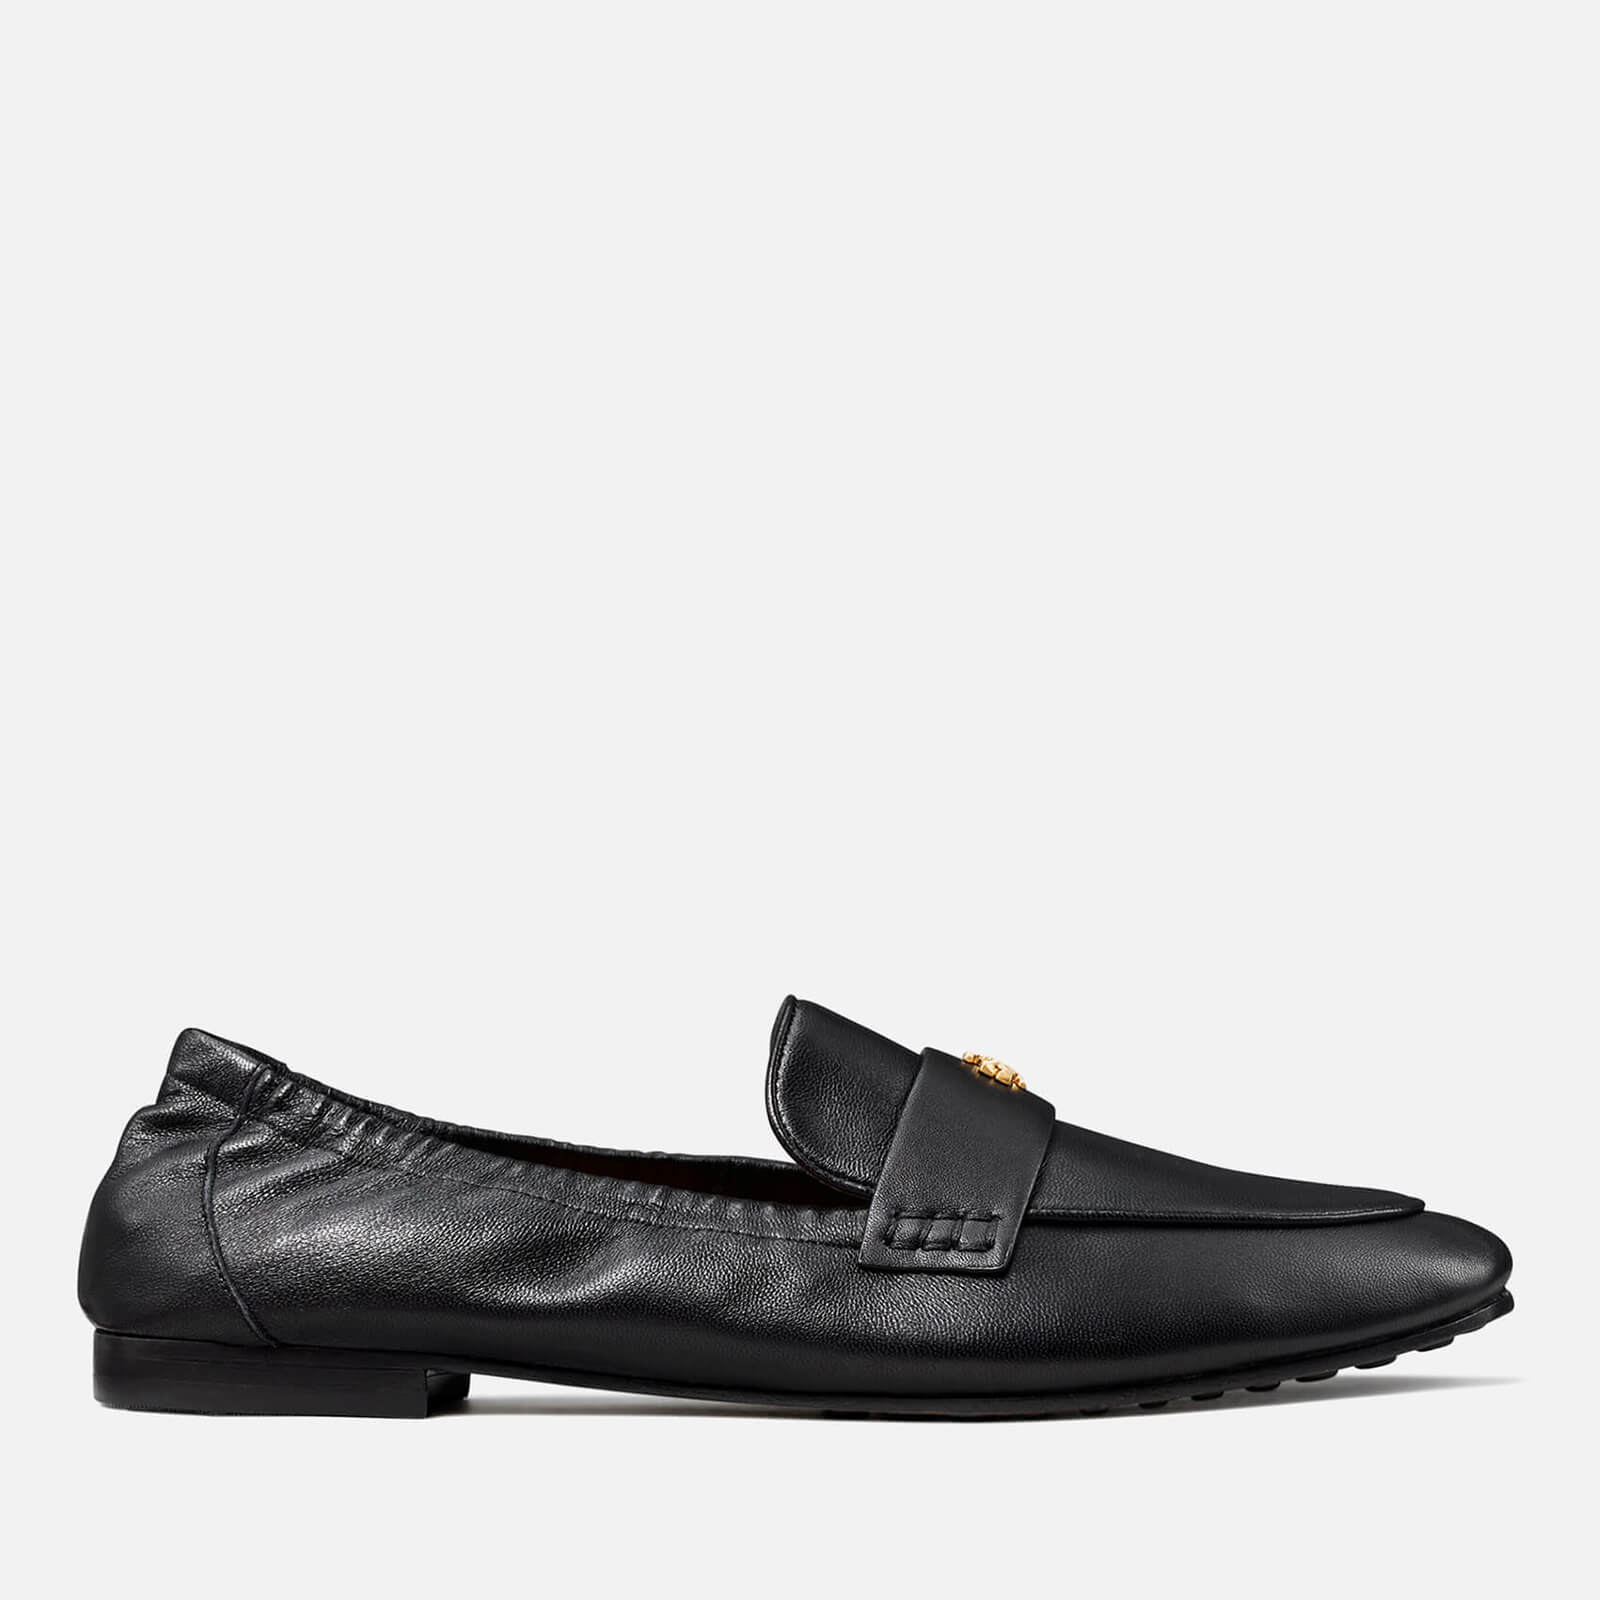 Tory Burch Women’s Ballet Leather Loafers - Perfect Black